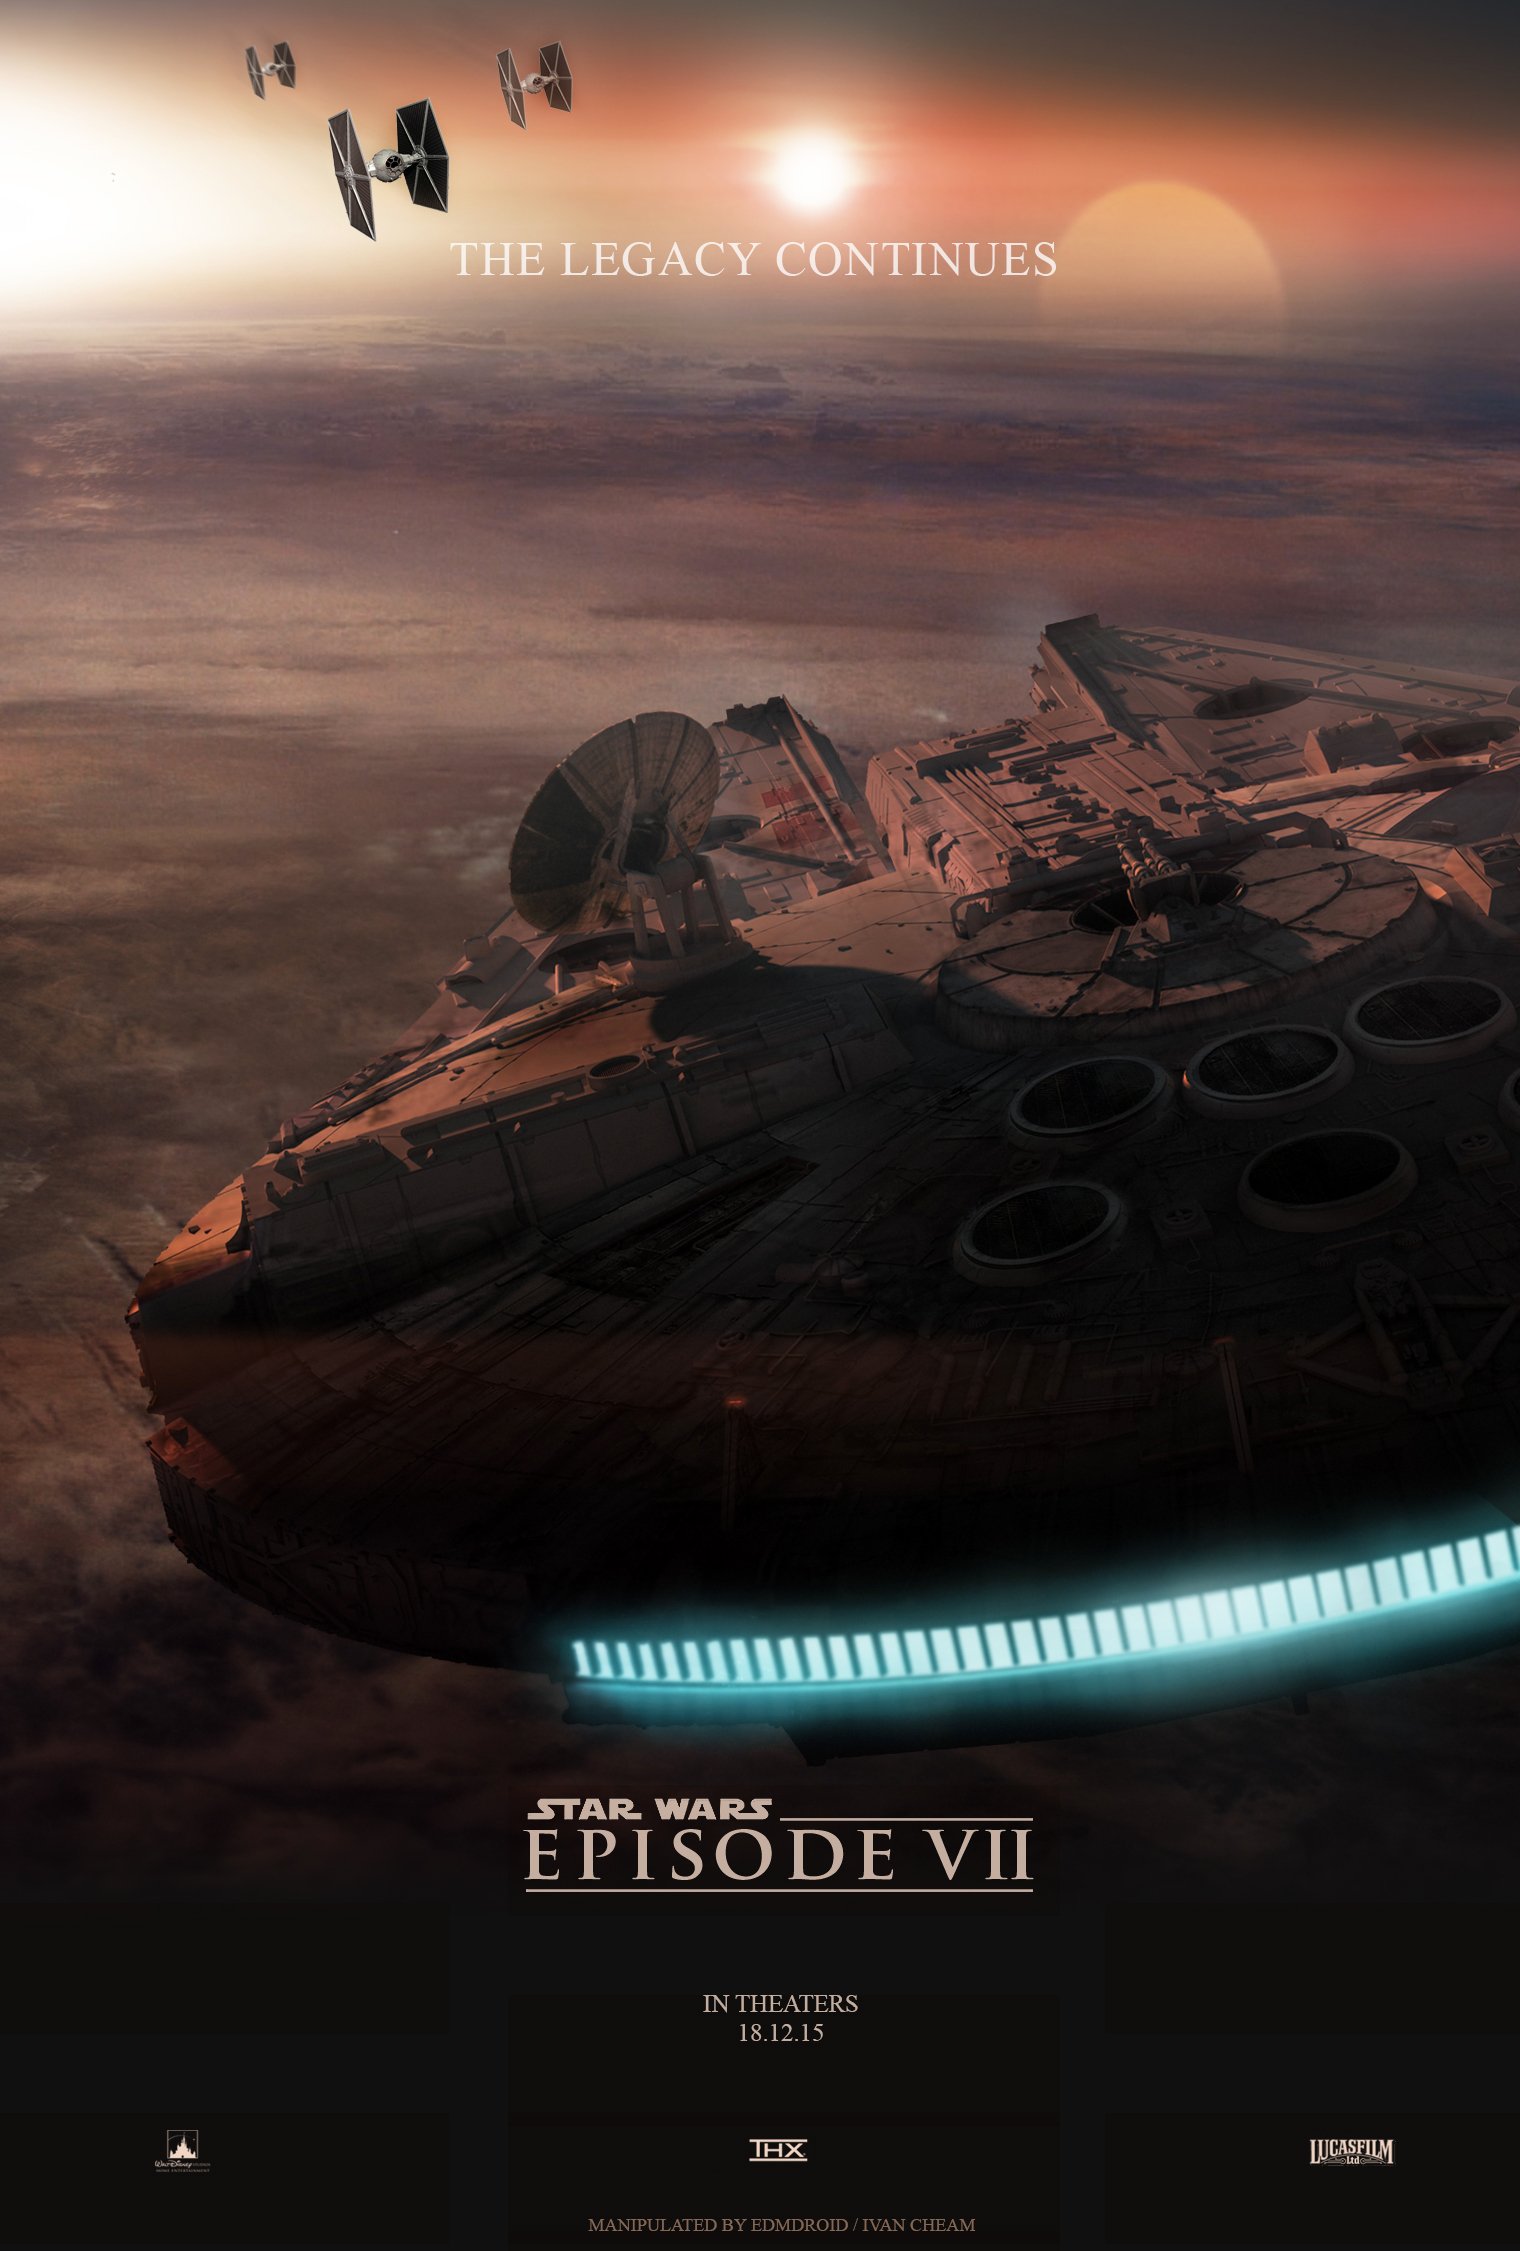 Star Wars Episode 7 Millenium Falcon Poster Fan Made by Ivan Cheam